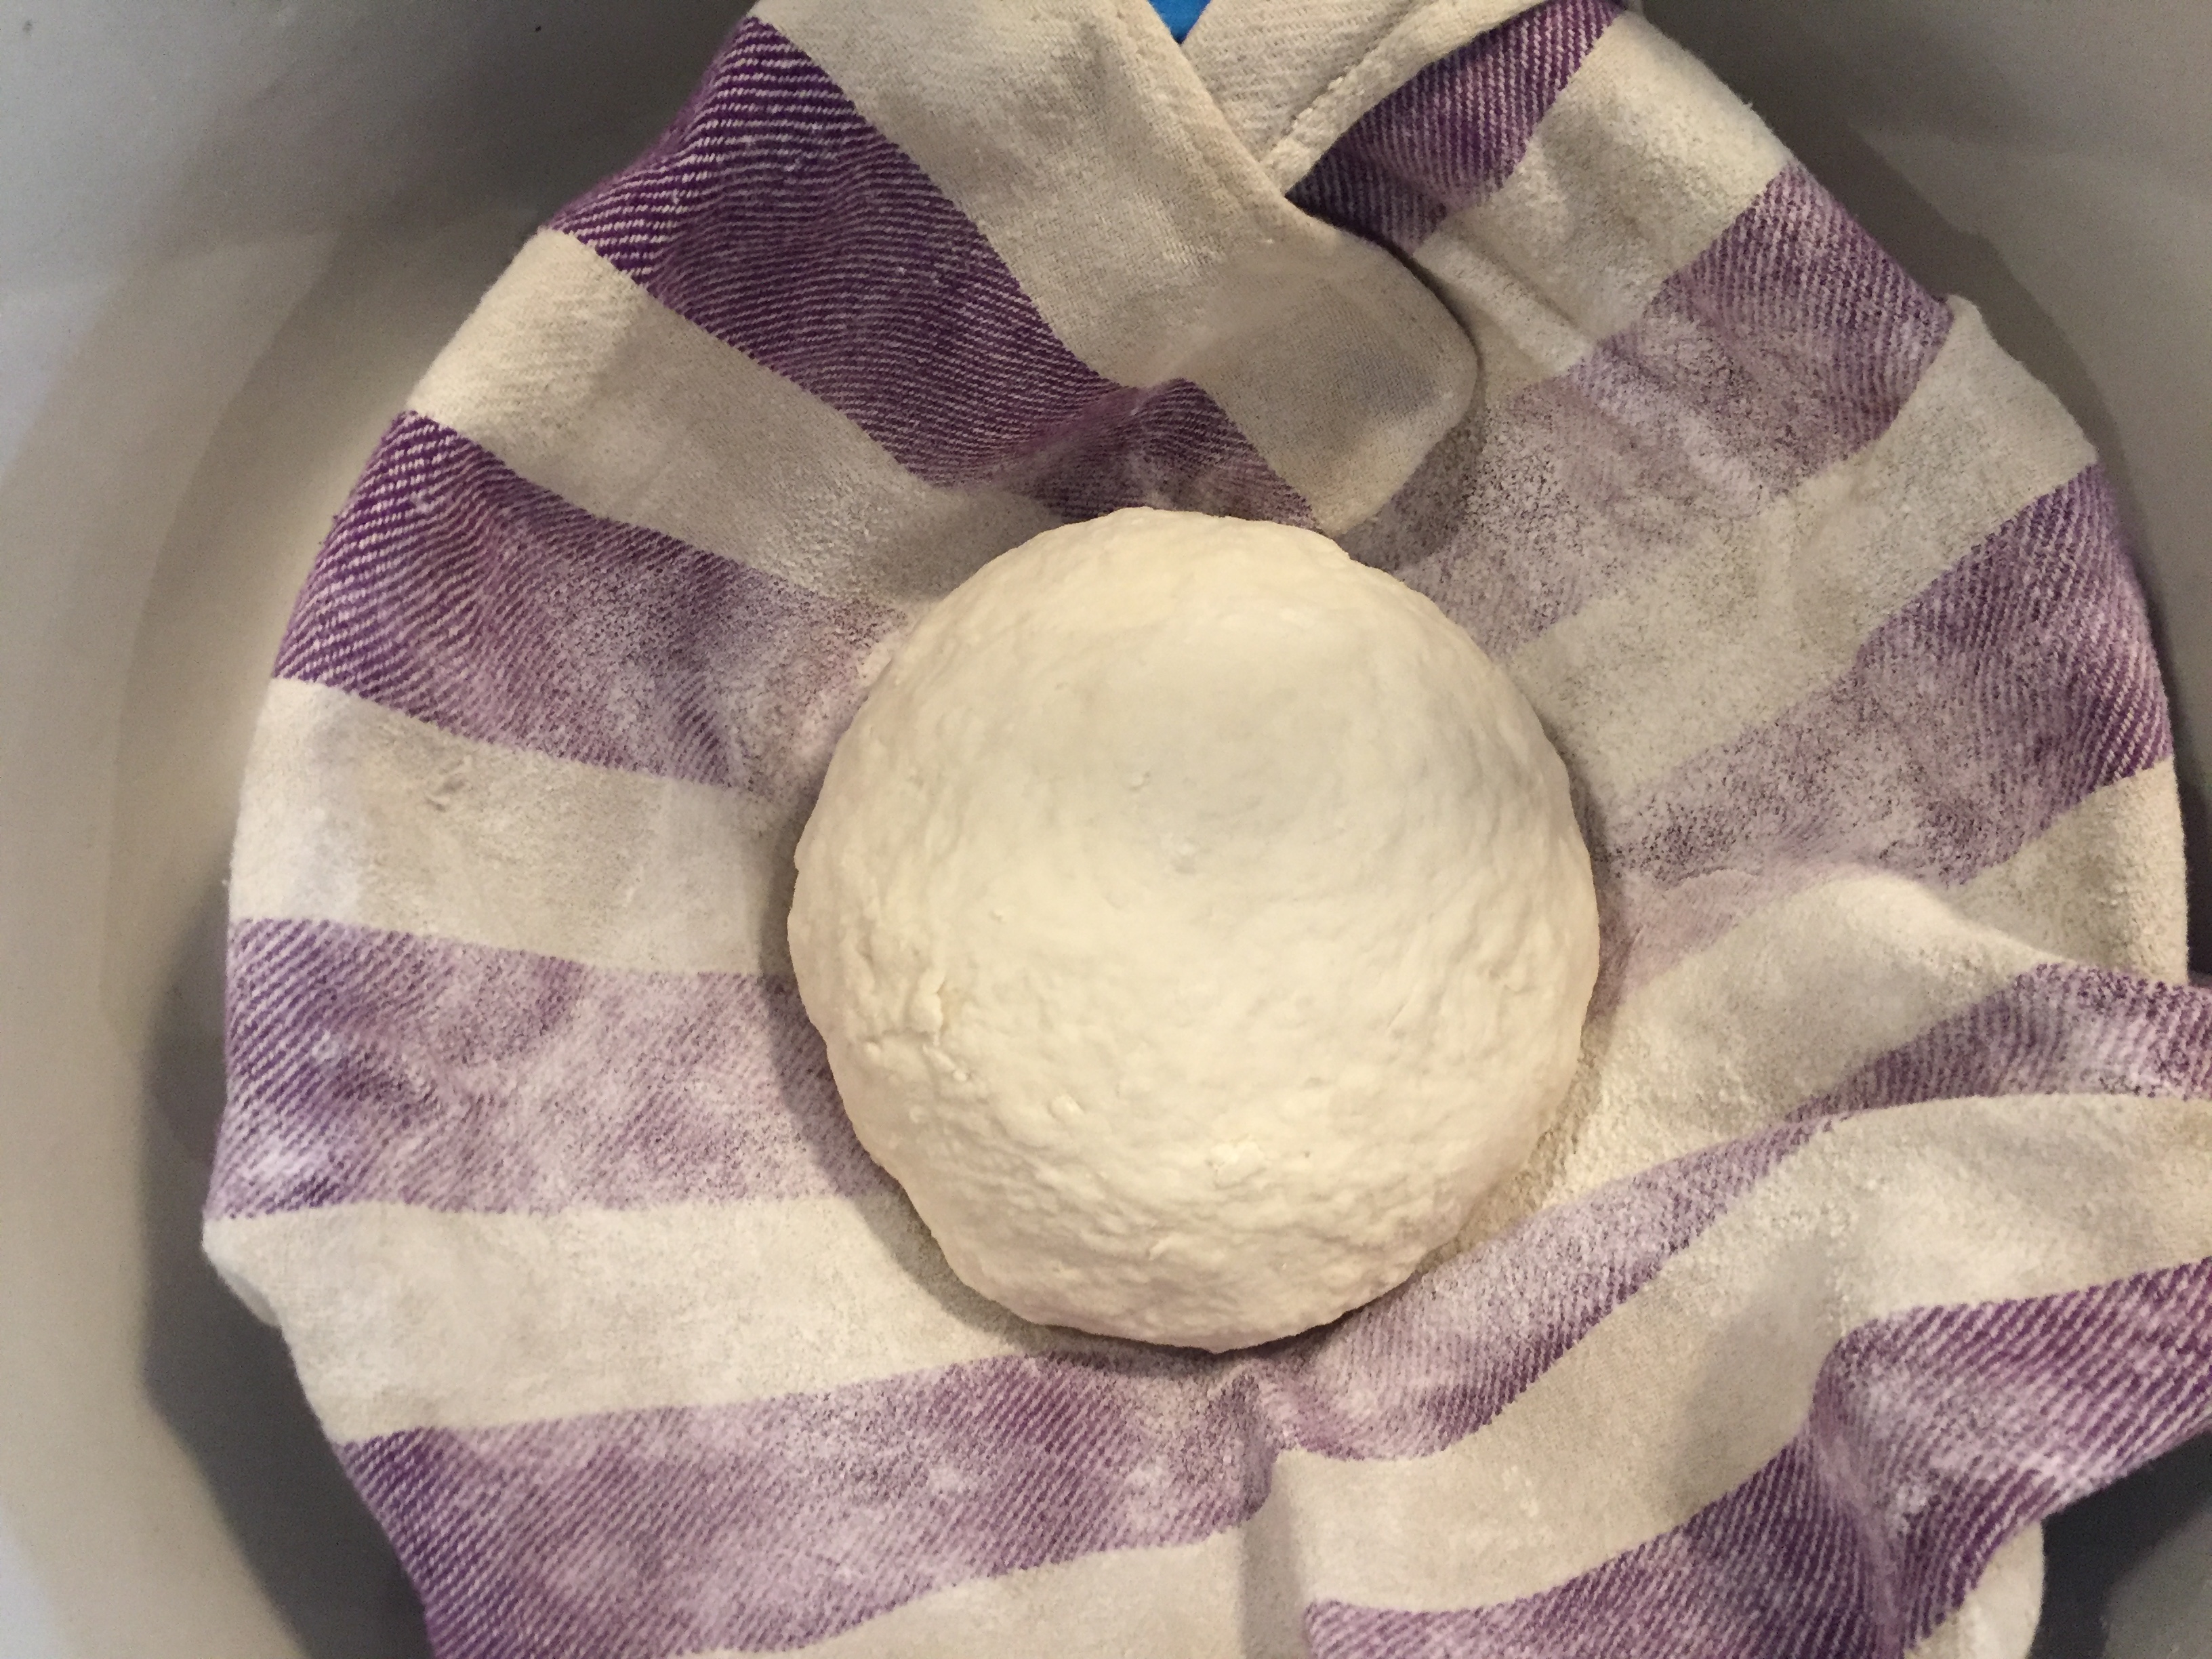 Here’s the dough in the proofing bowl